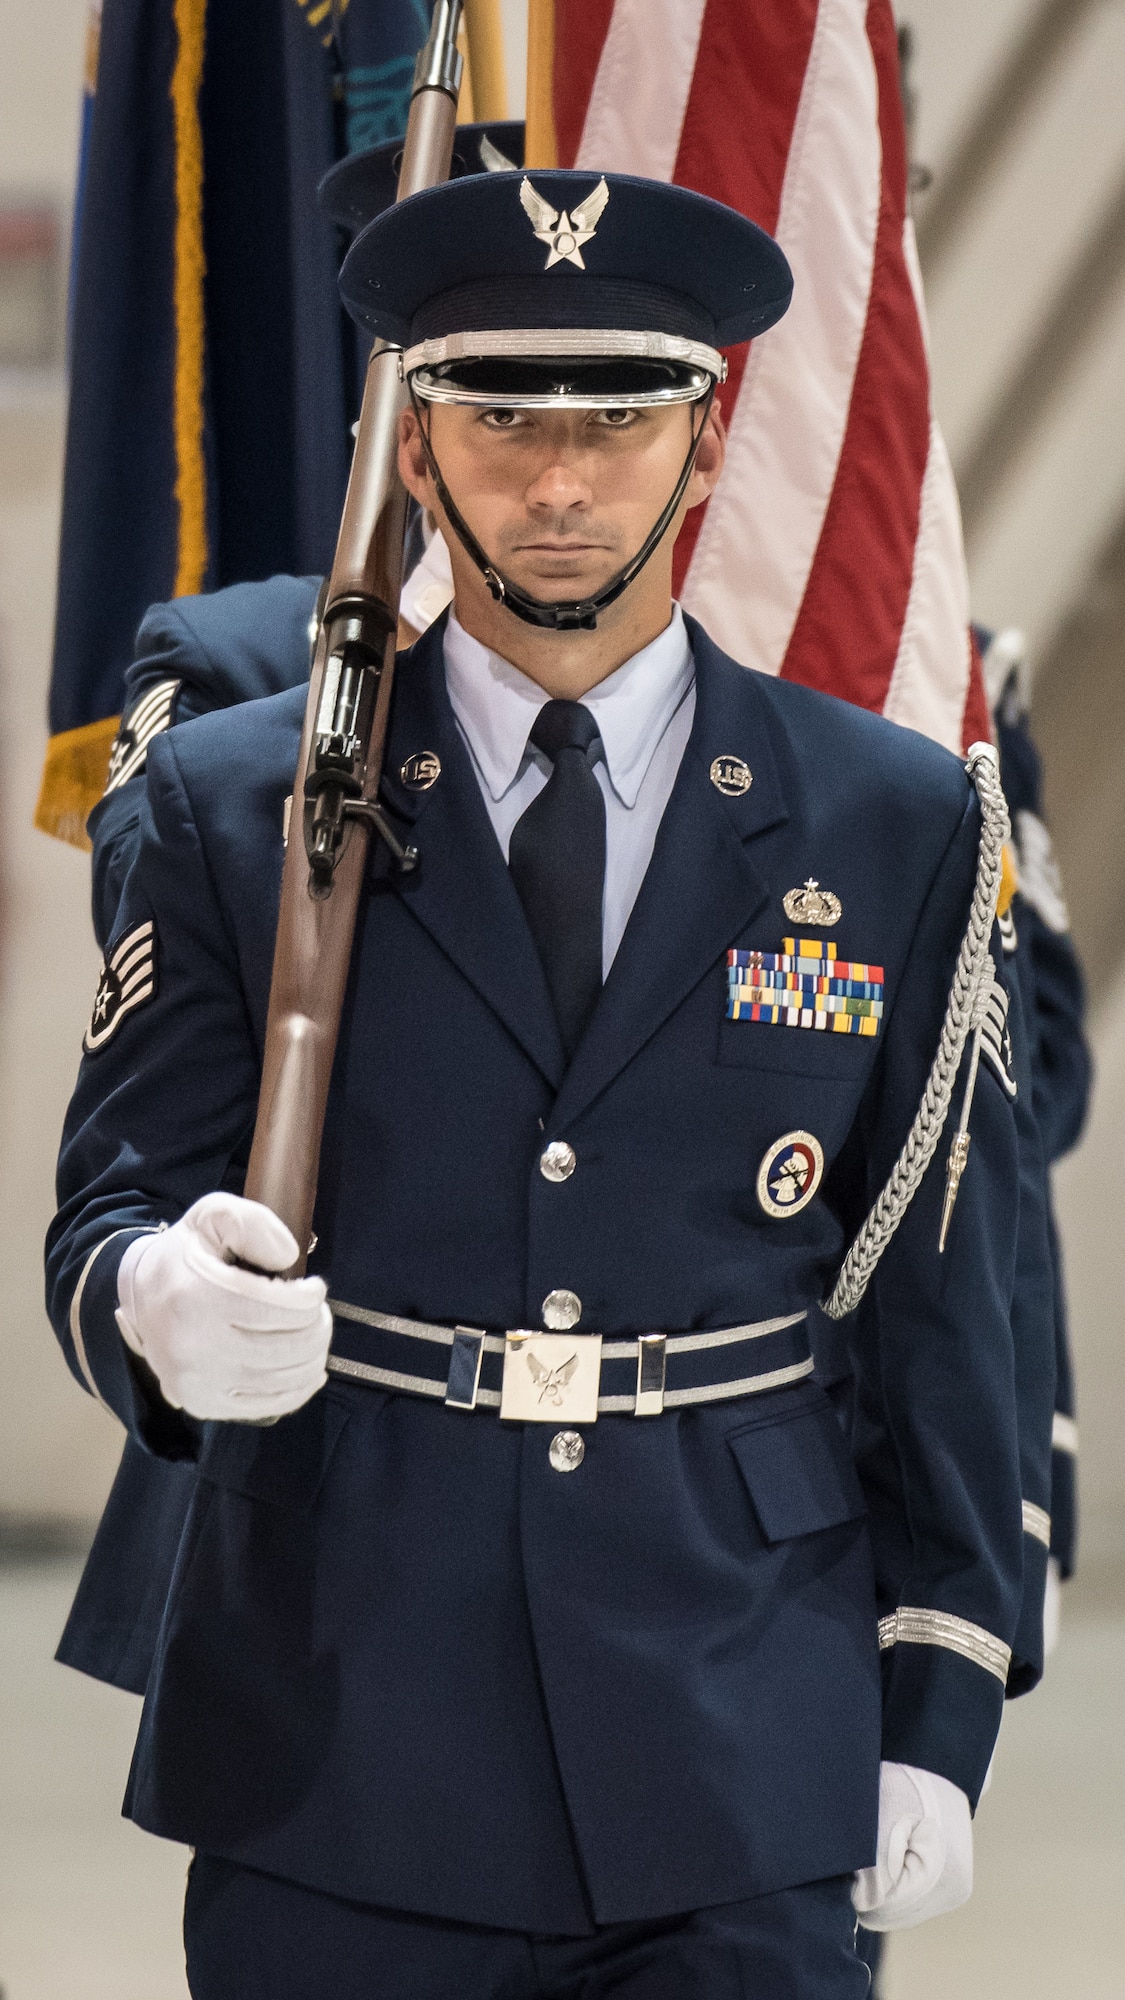 The 123rd Airlift Wing Honor Guard presents the colors during a ceremony at the Kentucky Air National Guard Base in Louisville, Ky, Aug.13, 2019, to bestow the Air Force Cross on Tech. Sgt. Daniel Keller, a combat controller in the 123rd Special Tactics Squadron. Keller earned the medal for valor on the battlefield in Afghanistan. (U.S. Air National Guard photo by Dale Greer)